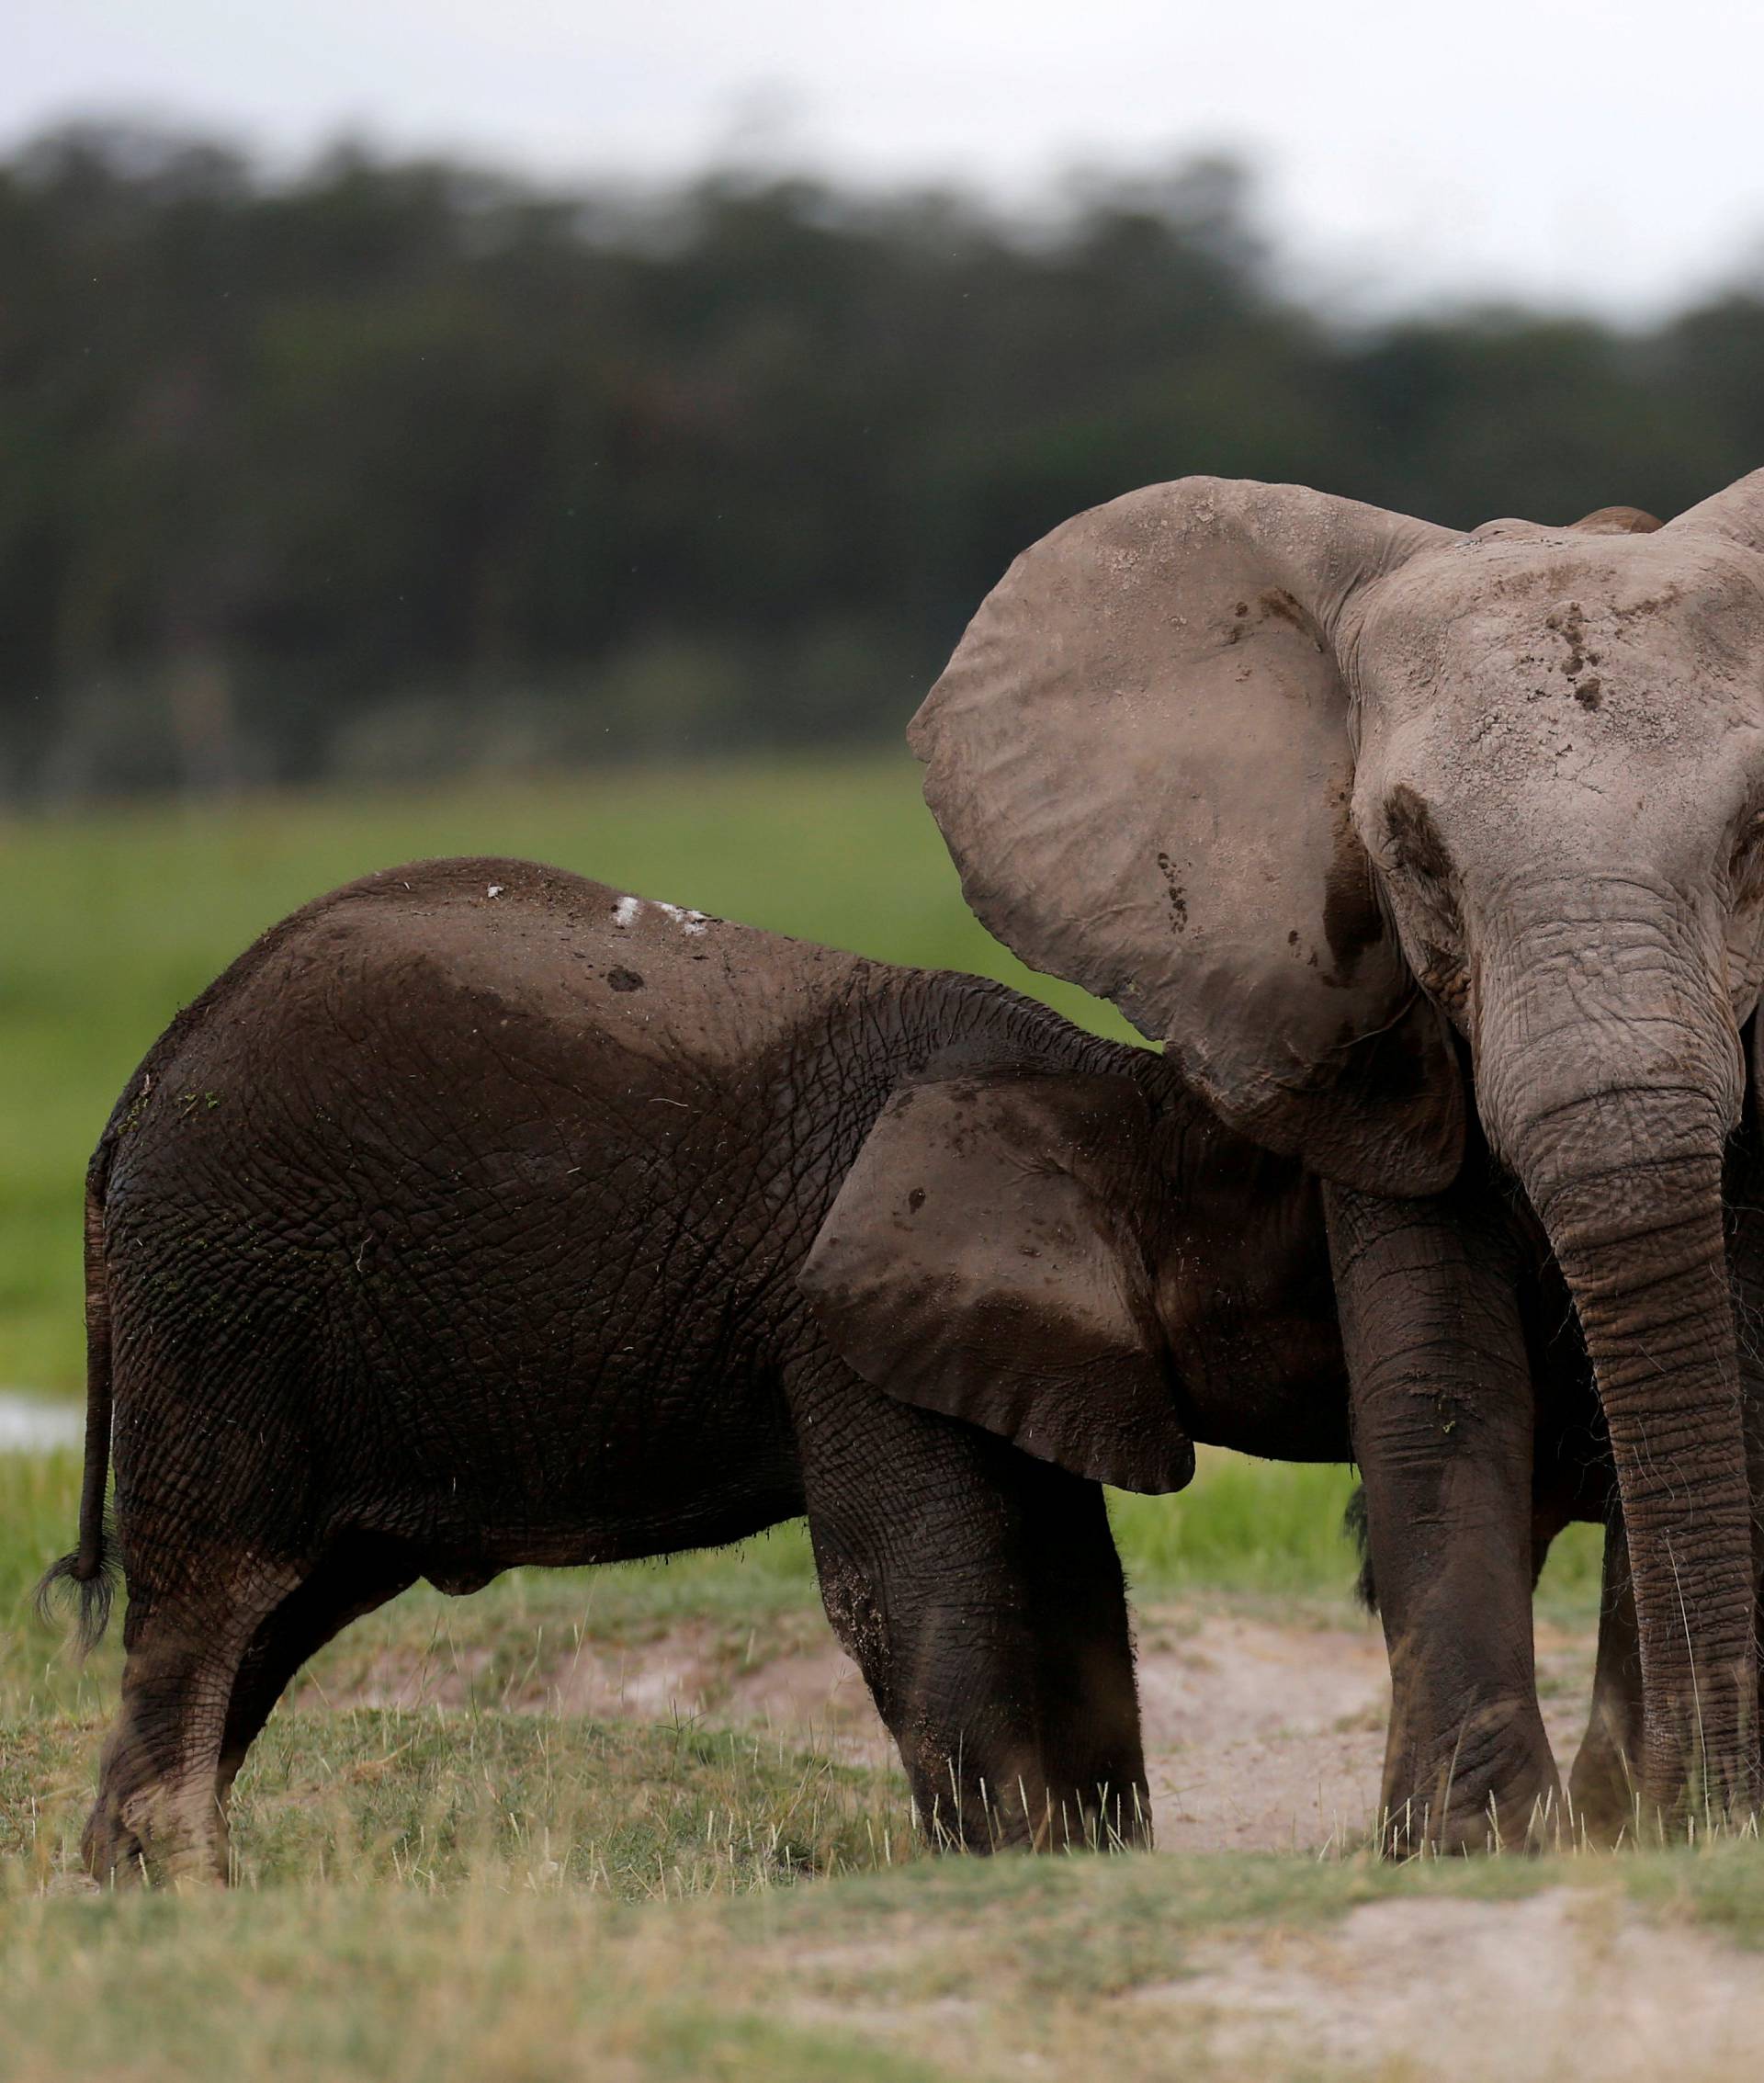 An elephant breastfeeds its young one at the Amboseli National Park, southeast of Kenya's capital Nairobi